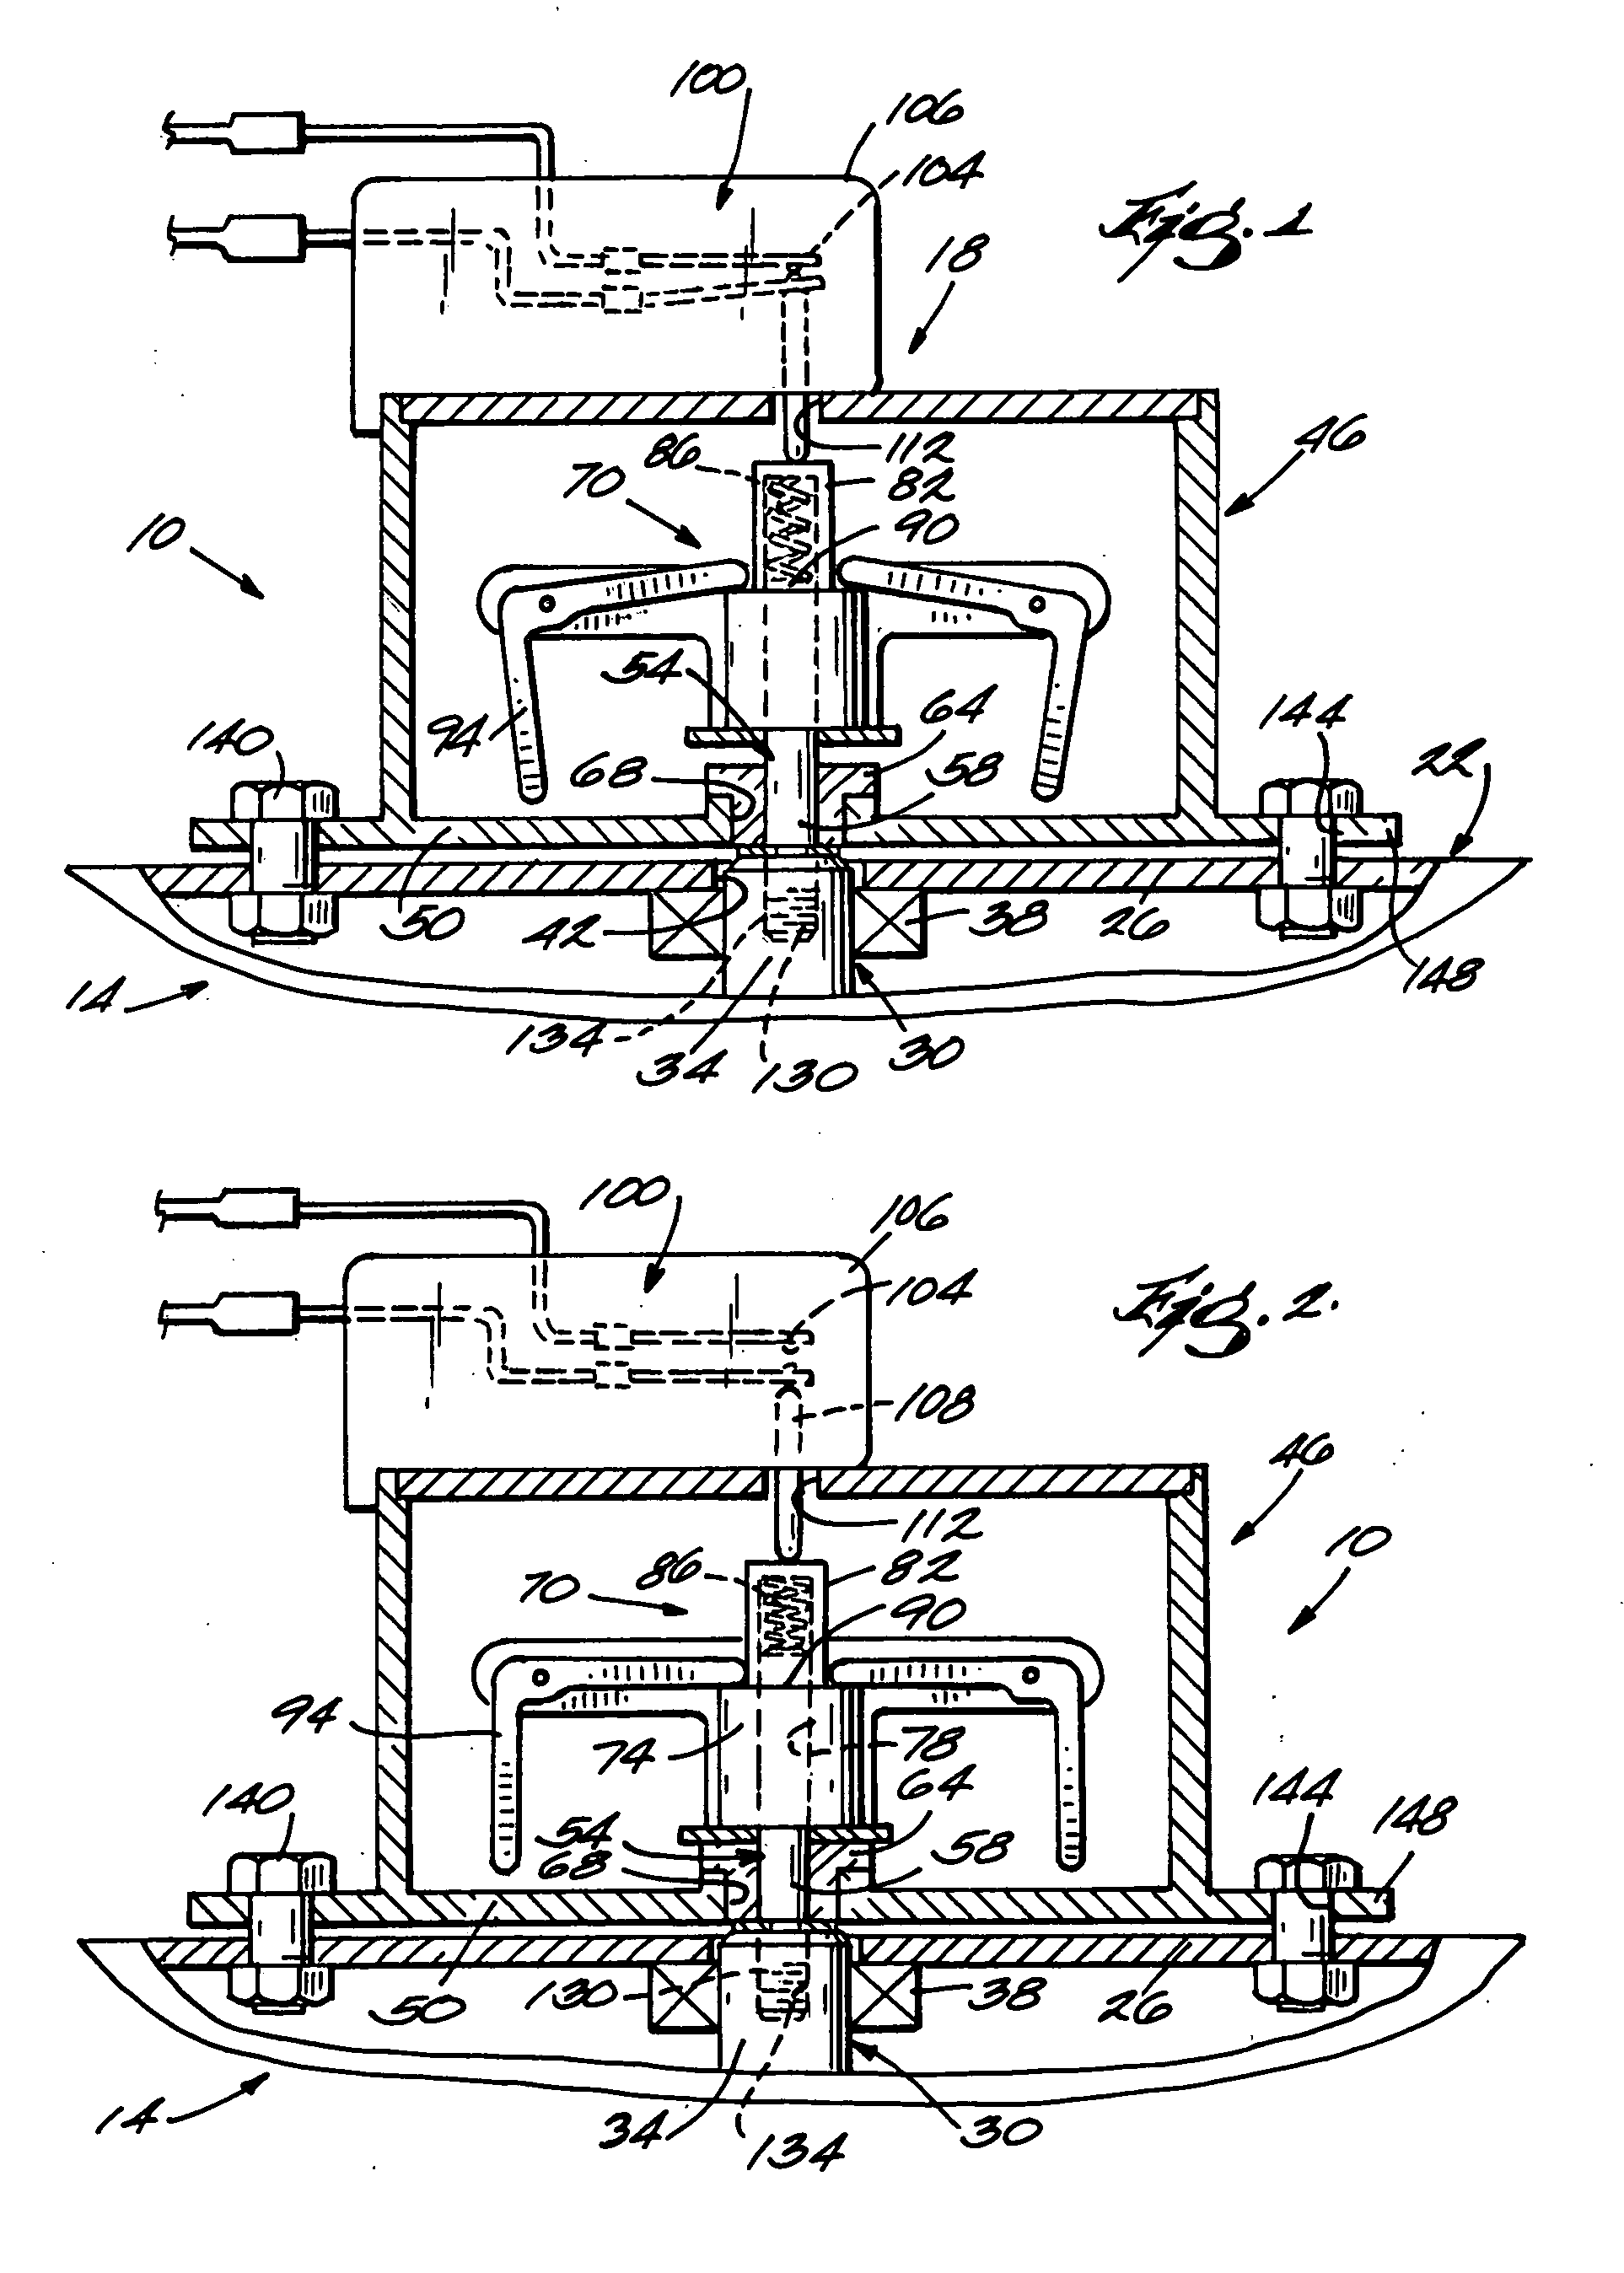 Electric motor assembly with a module attached to a motor housing